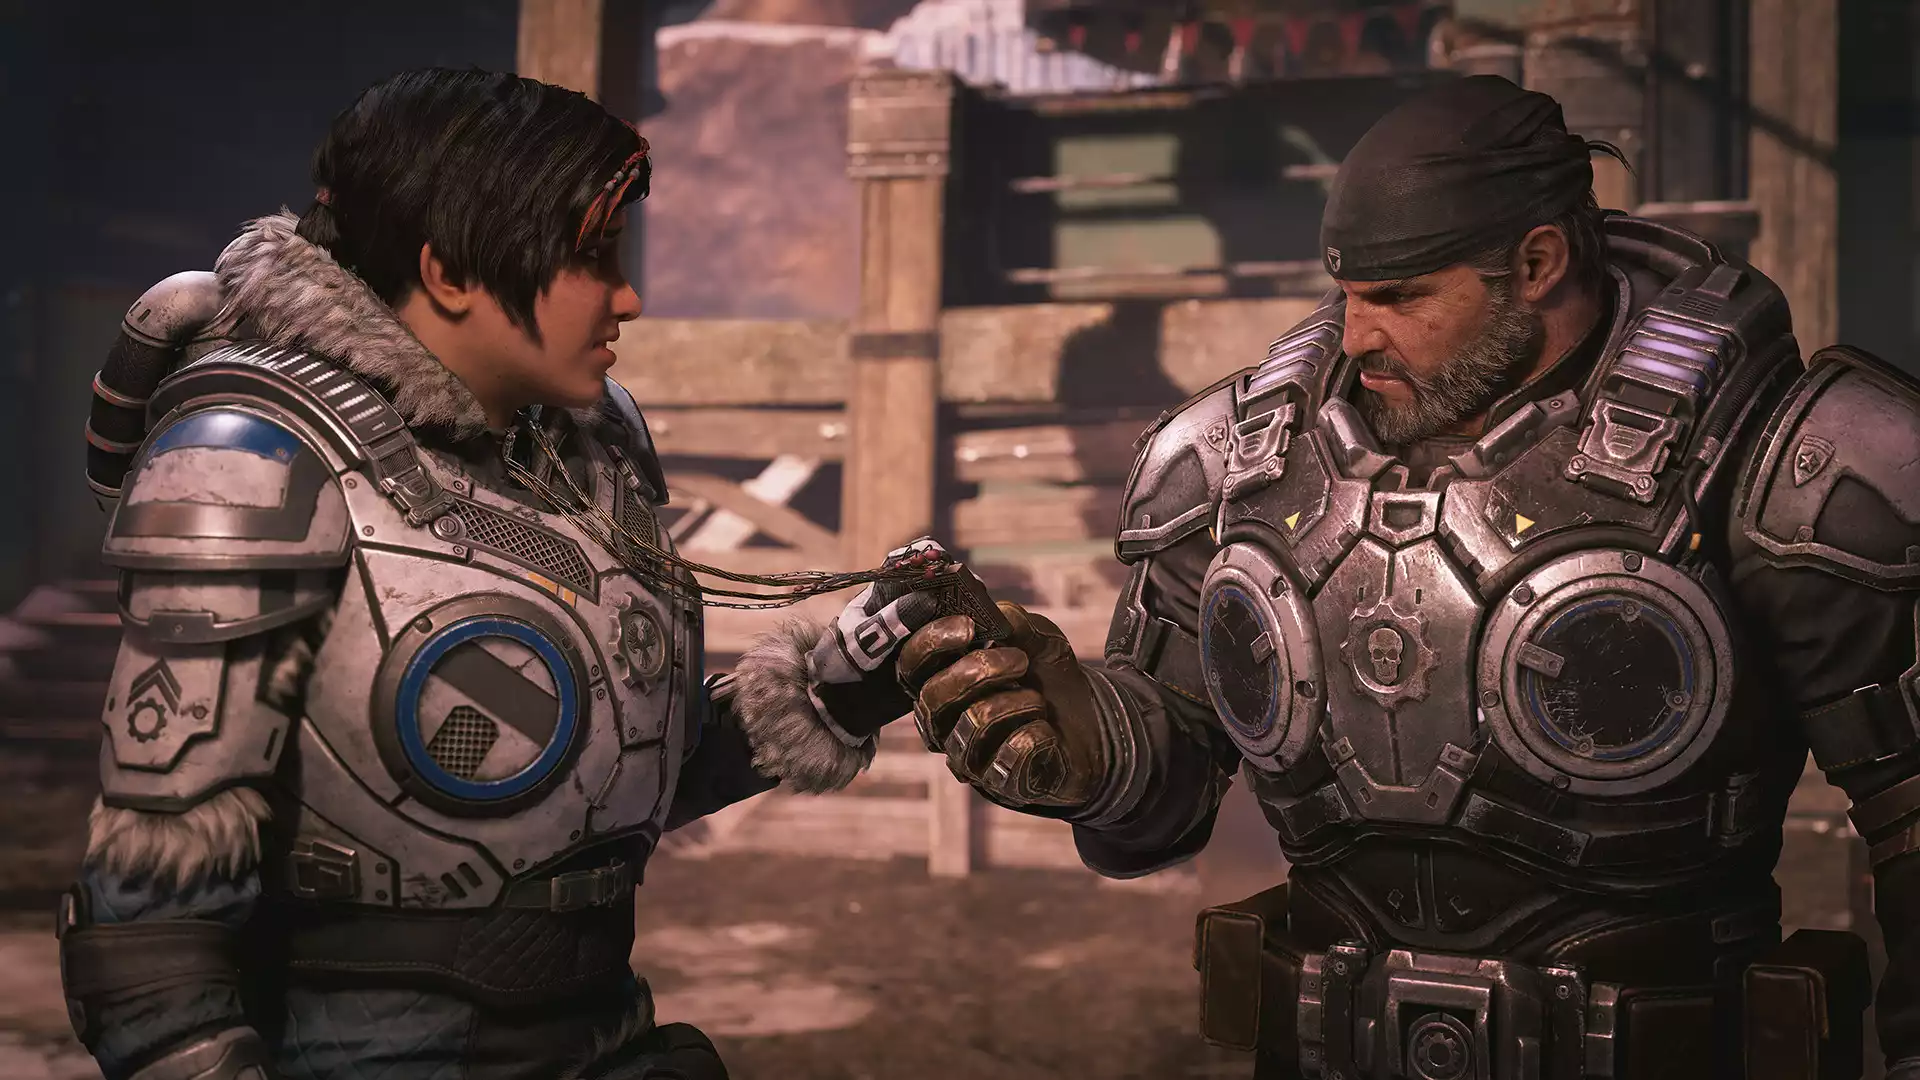 Coalition Cancels Projects - 'Full Steam Ahead' On Gears 6